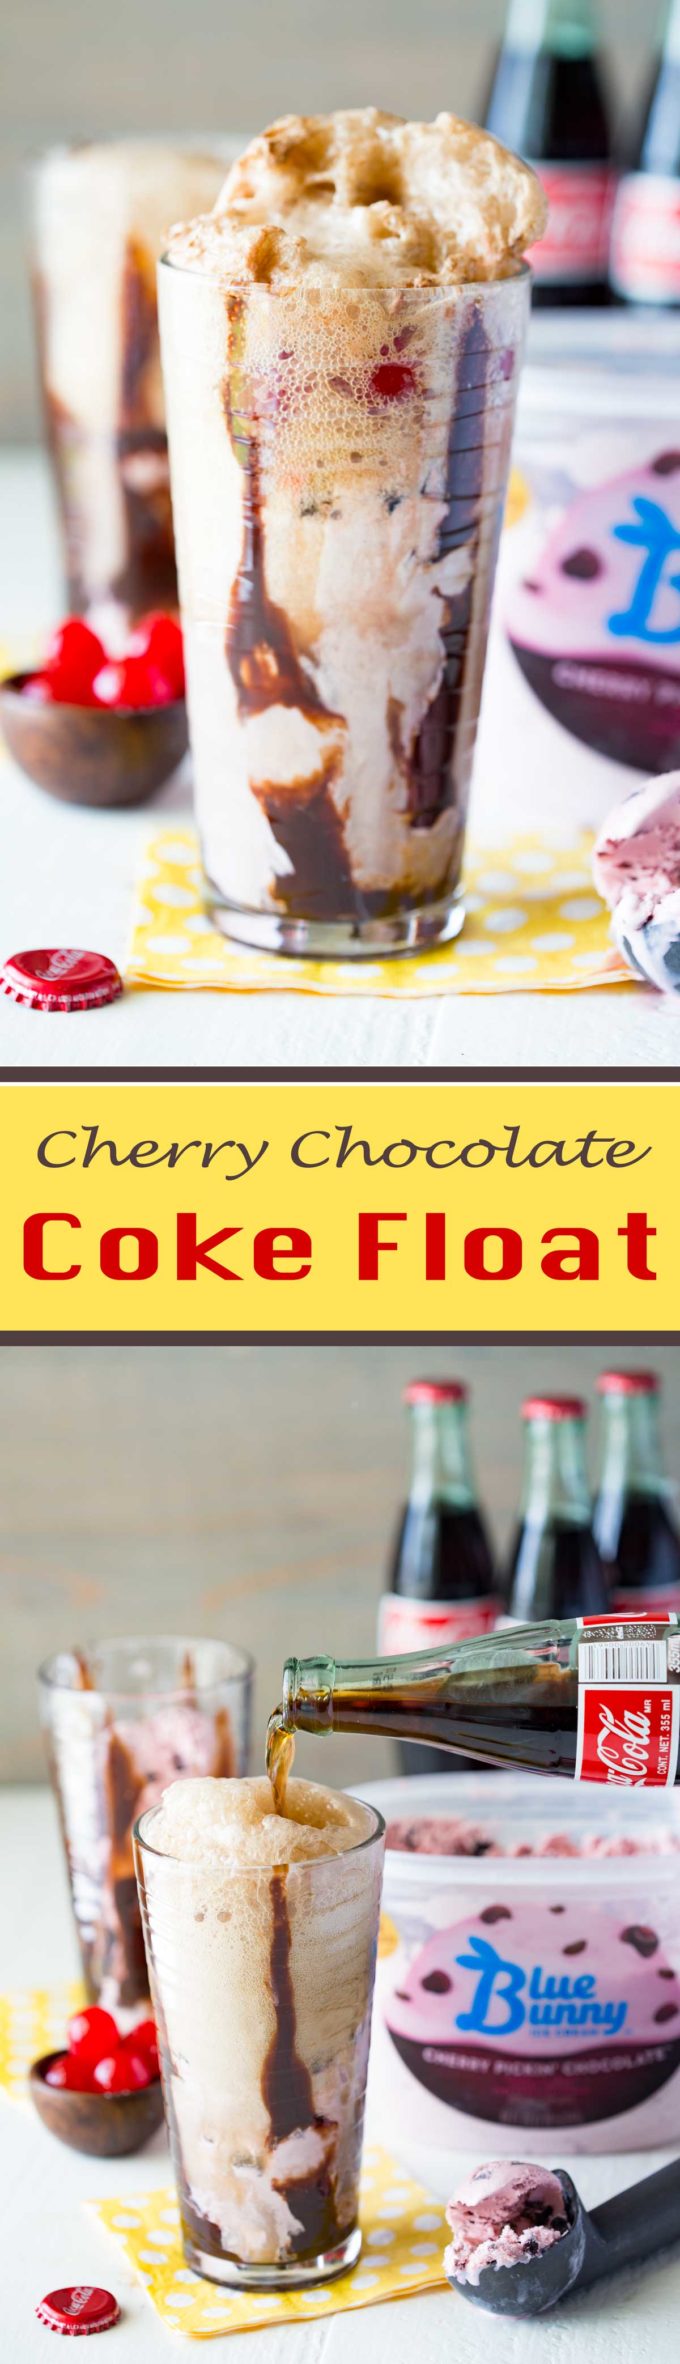 Cherry Chocolate Coke Float is a flavorful ice cream float!